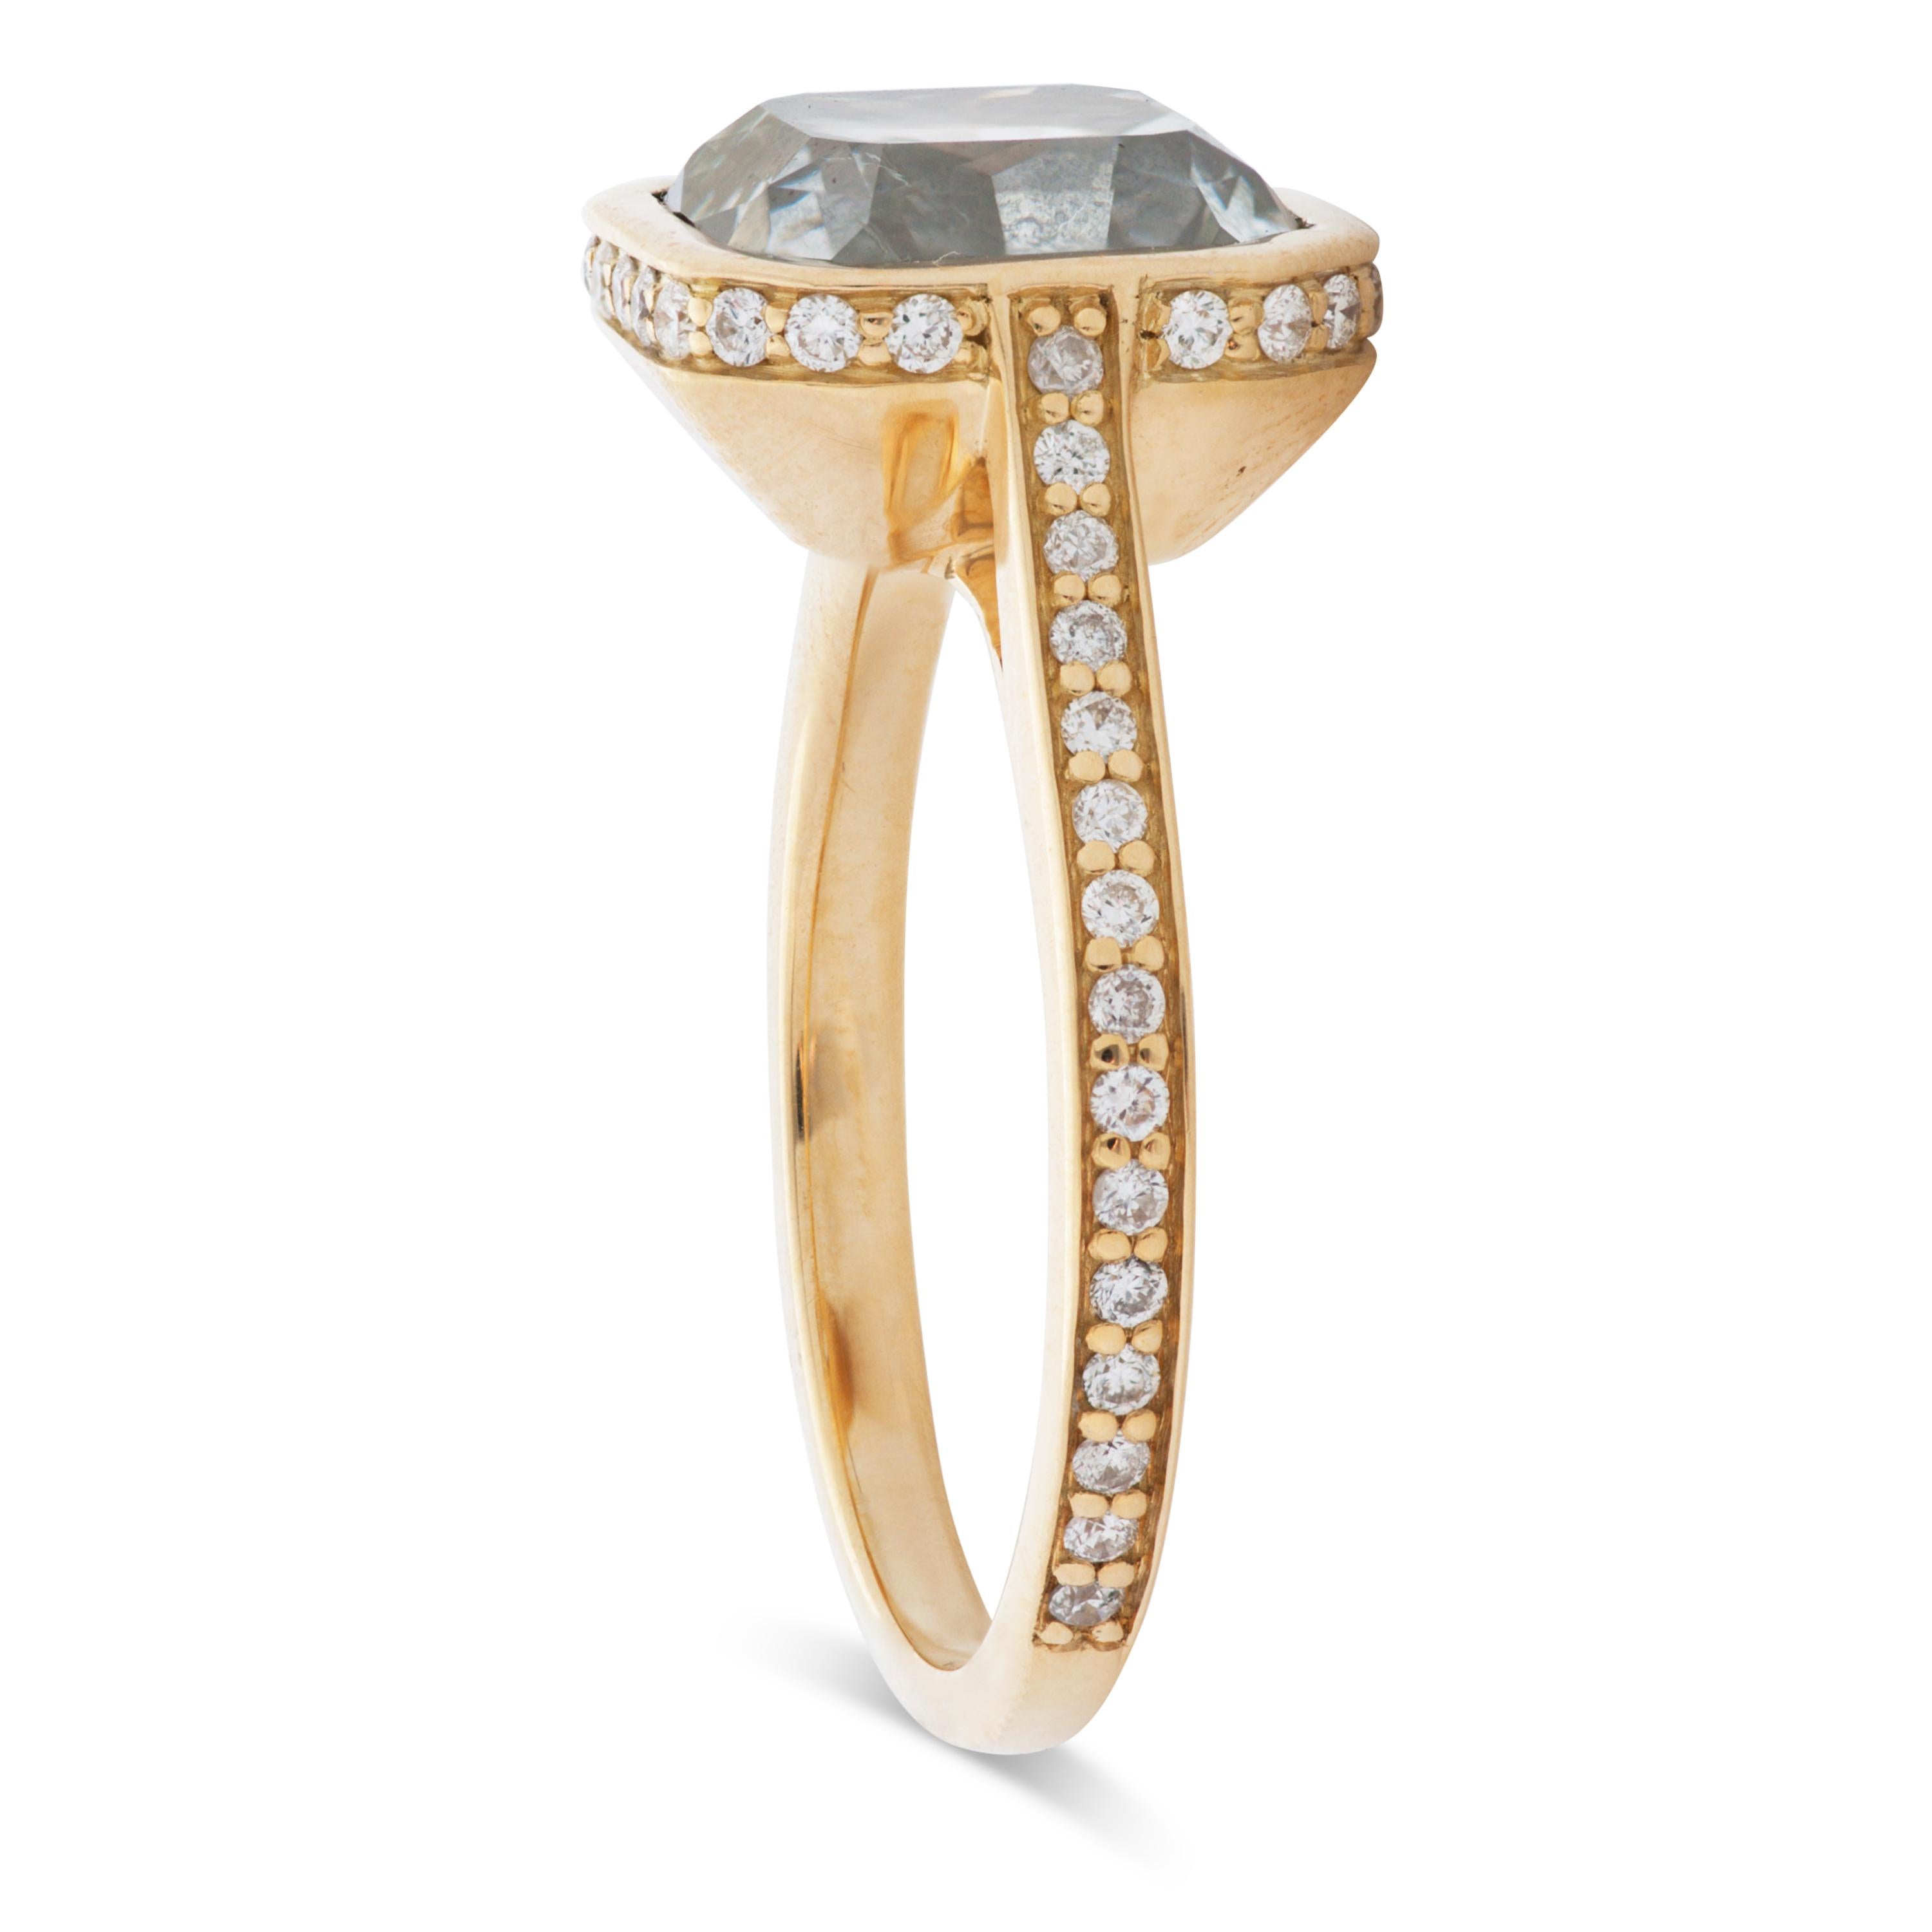 This modern engagement ring features a 4.55 carat very light gray radiant cut diamond with SI2 clarity bezel set in 18k yellow gold, accompanied by an IGI certificate.  52 round brilliant cut diamonds run around the bezel and down the shank totaling